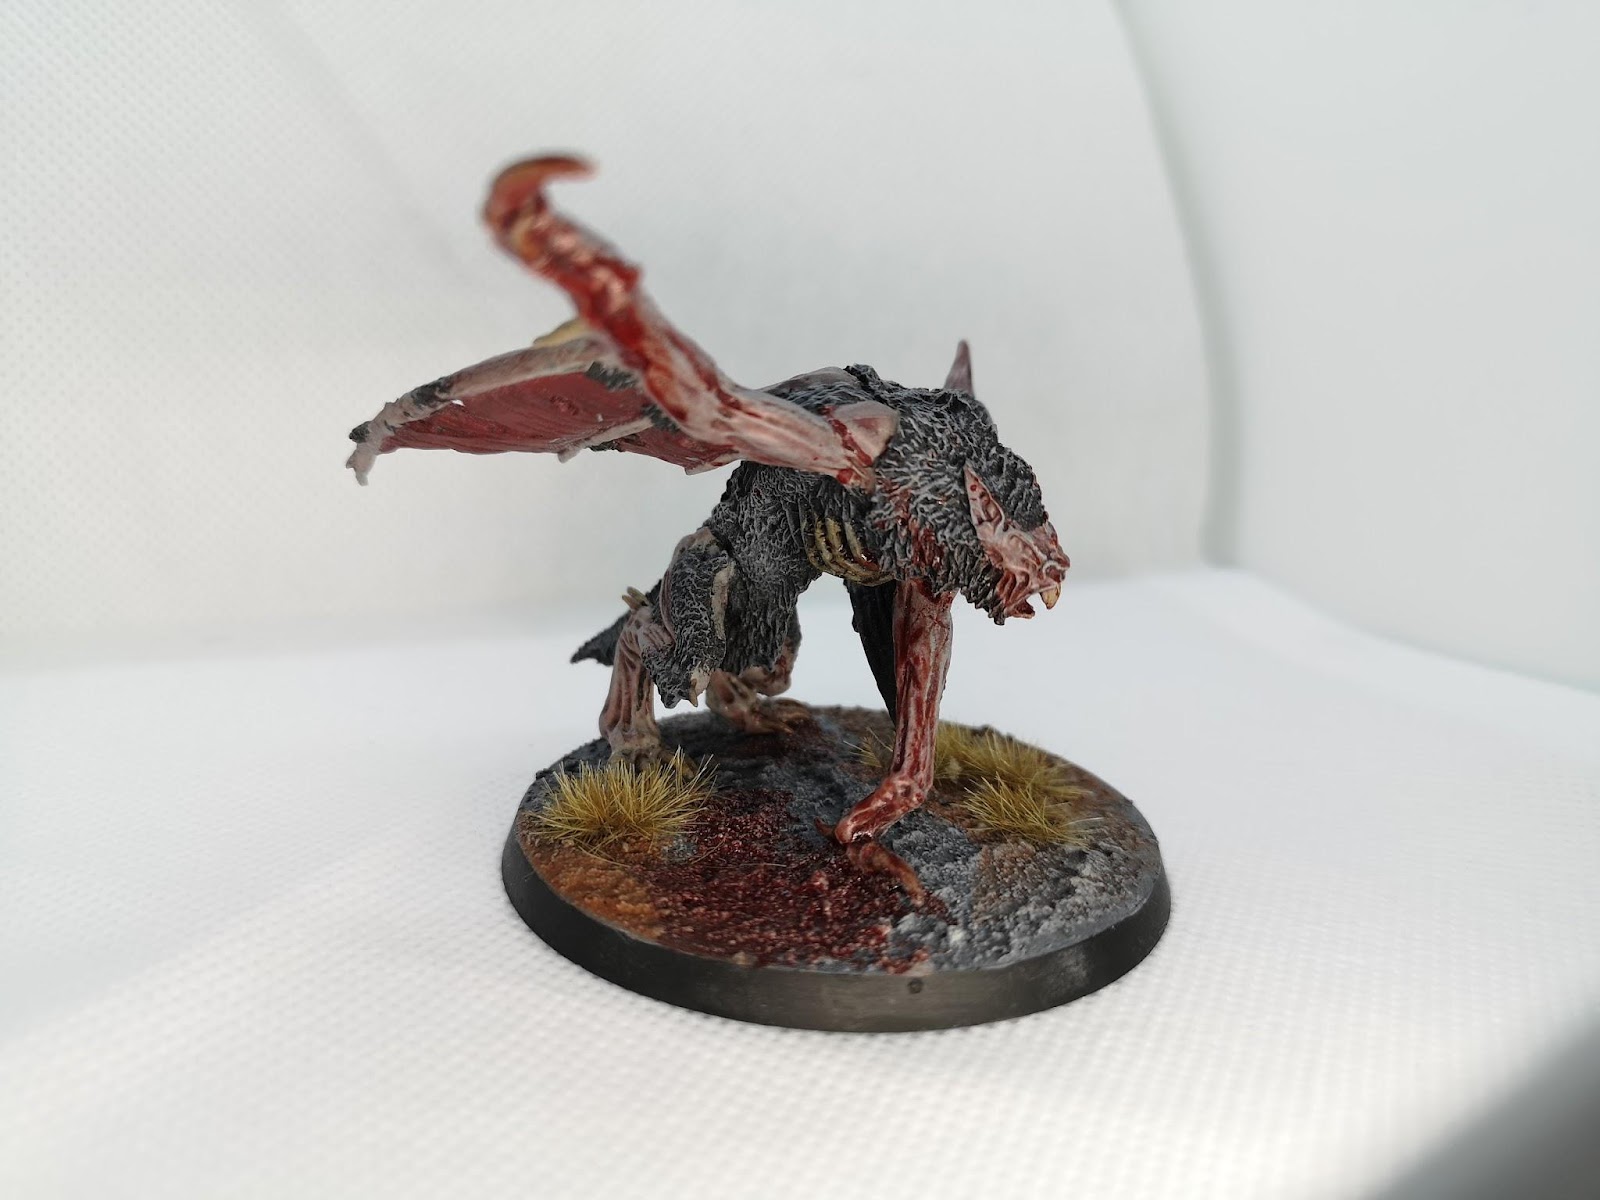 A Varghulf Courtier